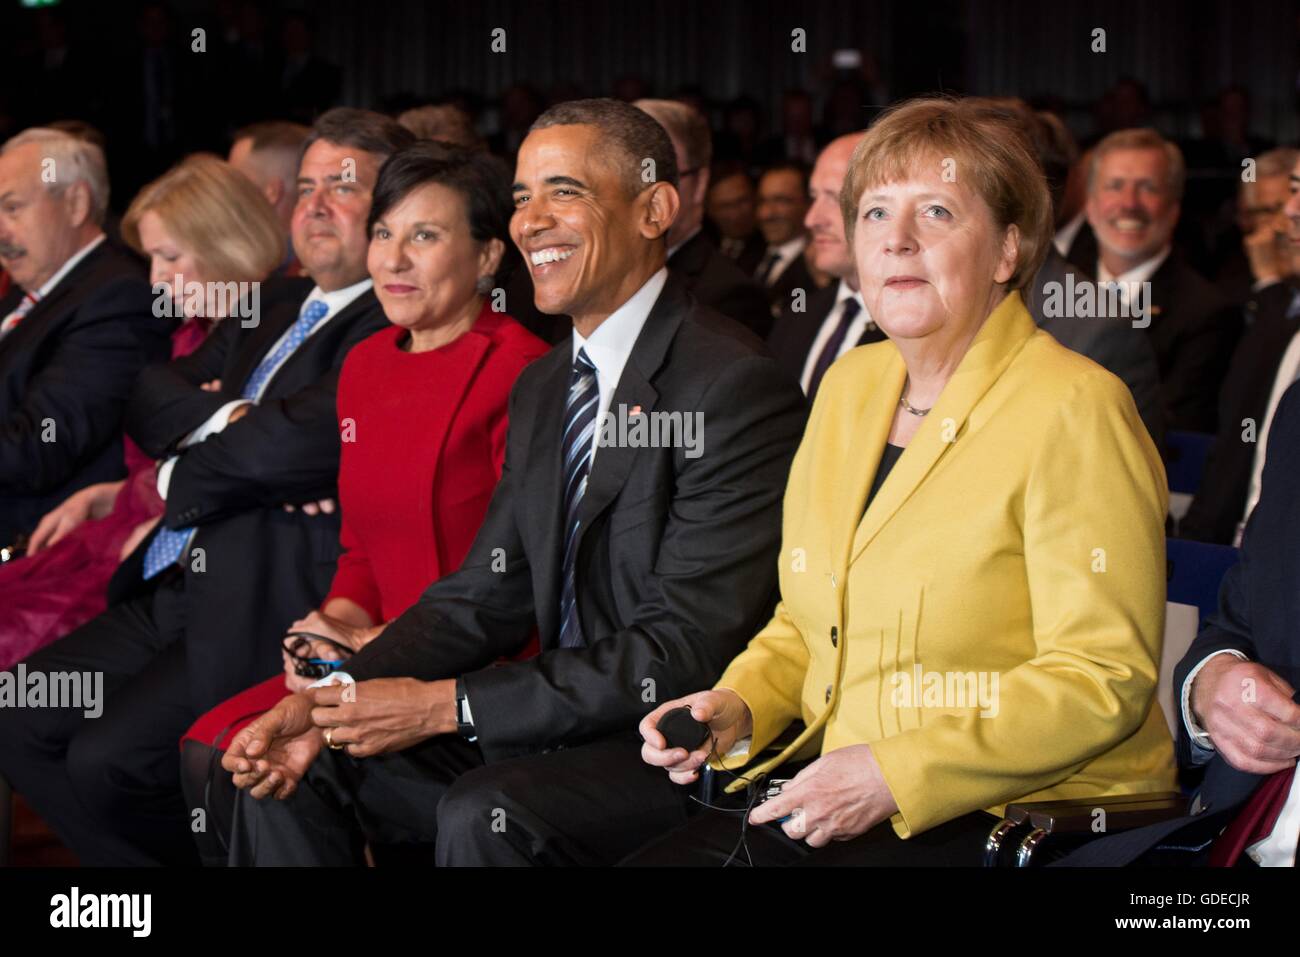 U.S President Barack Obama and German Chancellor Angela Merkel watch performances from Alvin Ailey Dance Theater and the cast of the Broadway musical Wicked during the opening ceremony for the USA Pavilion at the Hannover Messe Trade Fair April 25, 2016 in Hannover, Germany. The event is the world's largest industrial technology trade fair held yearly since 1947 in northern Germany. Stock Photo